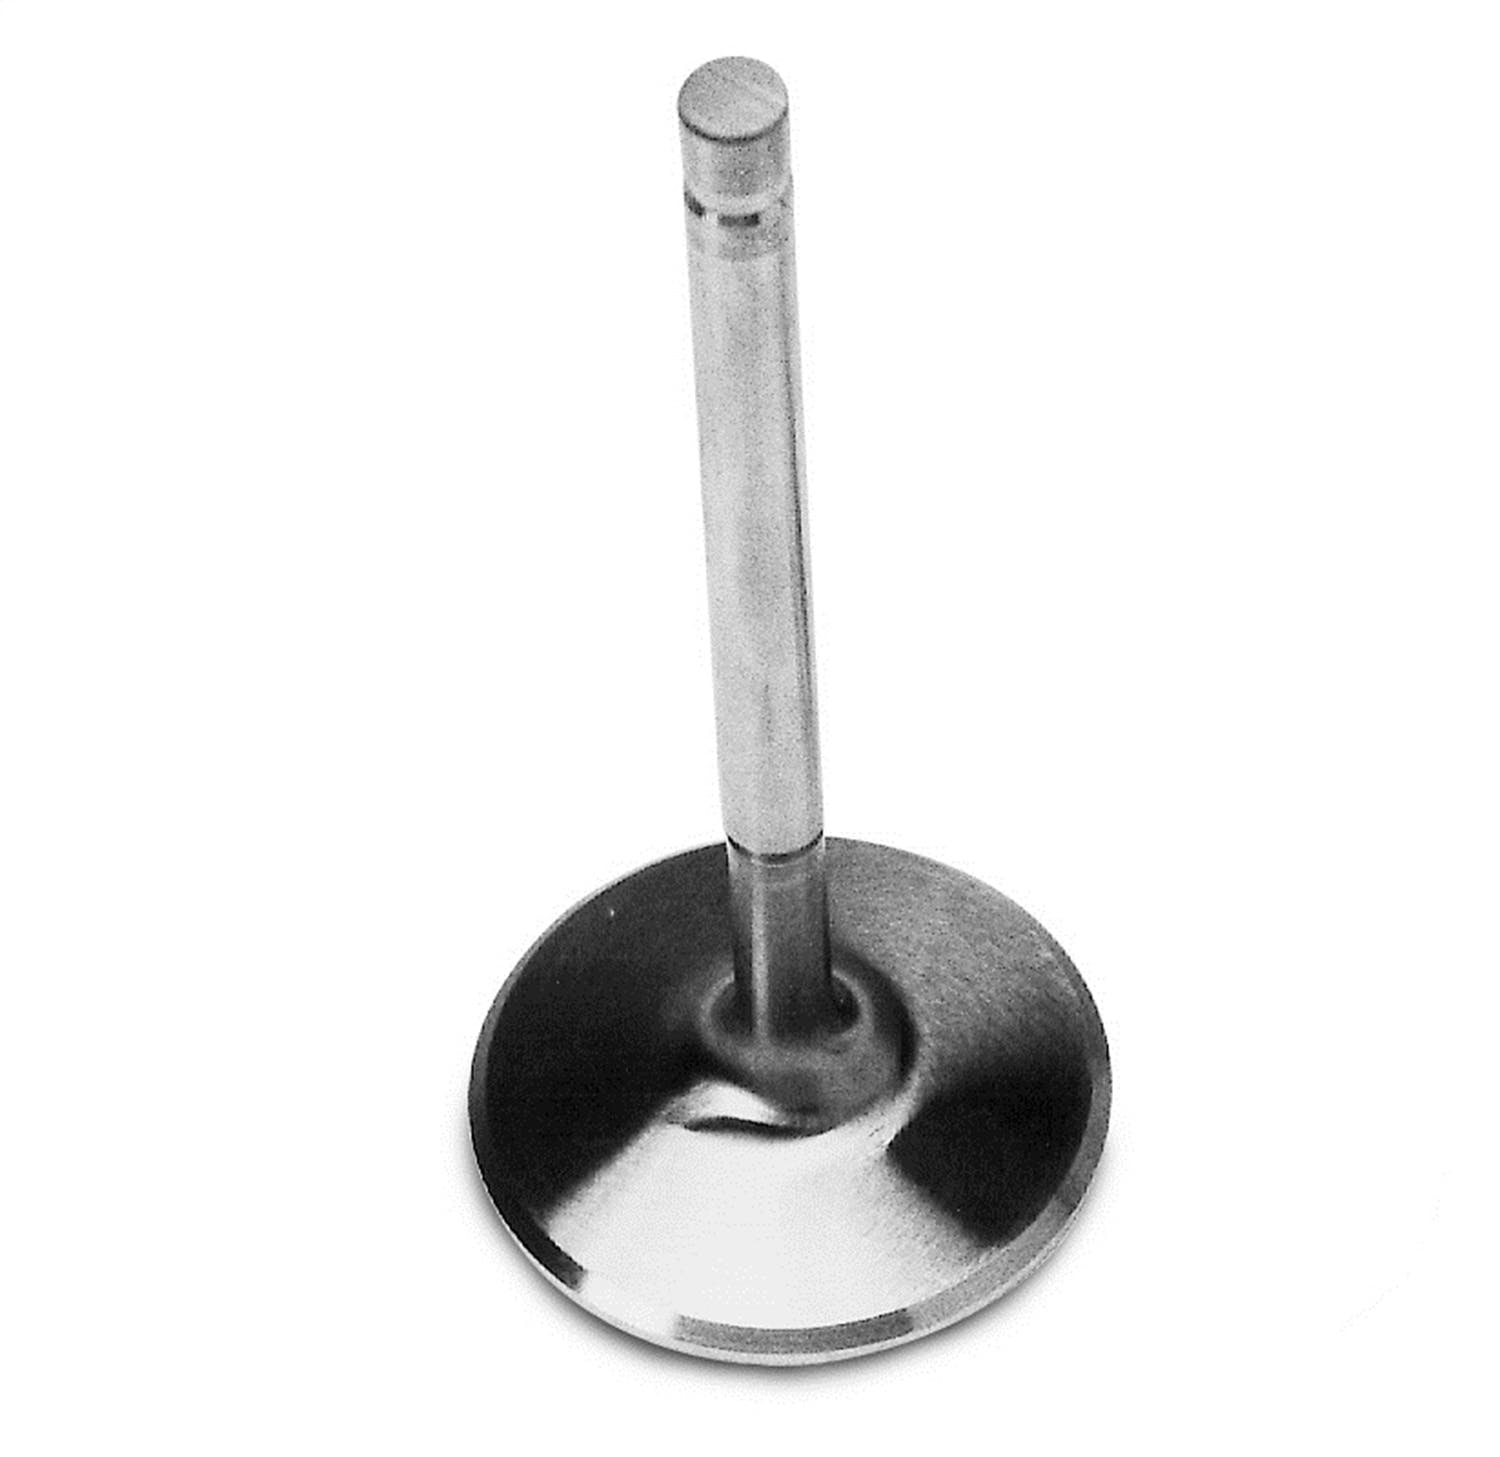 Edelbrock 9776 Exhaust Valve for 60459, 60479, 60499, 60559 and 60439 Heads